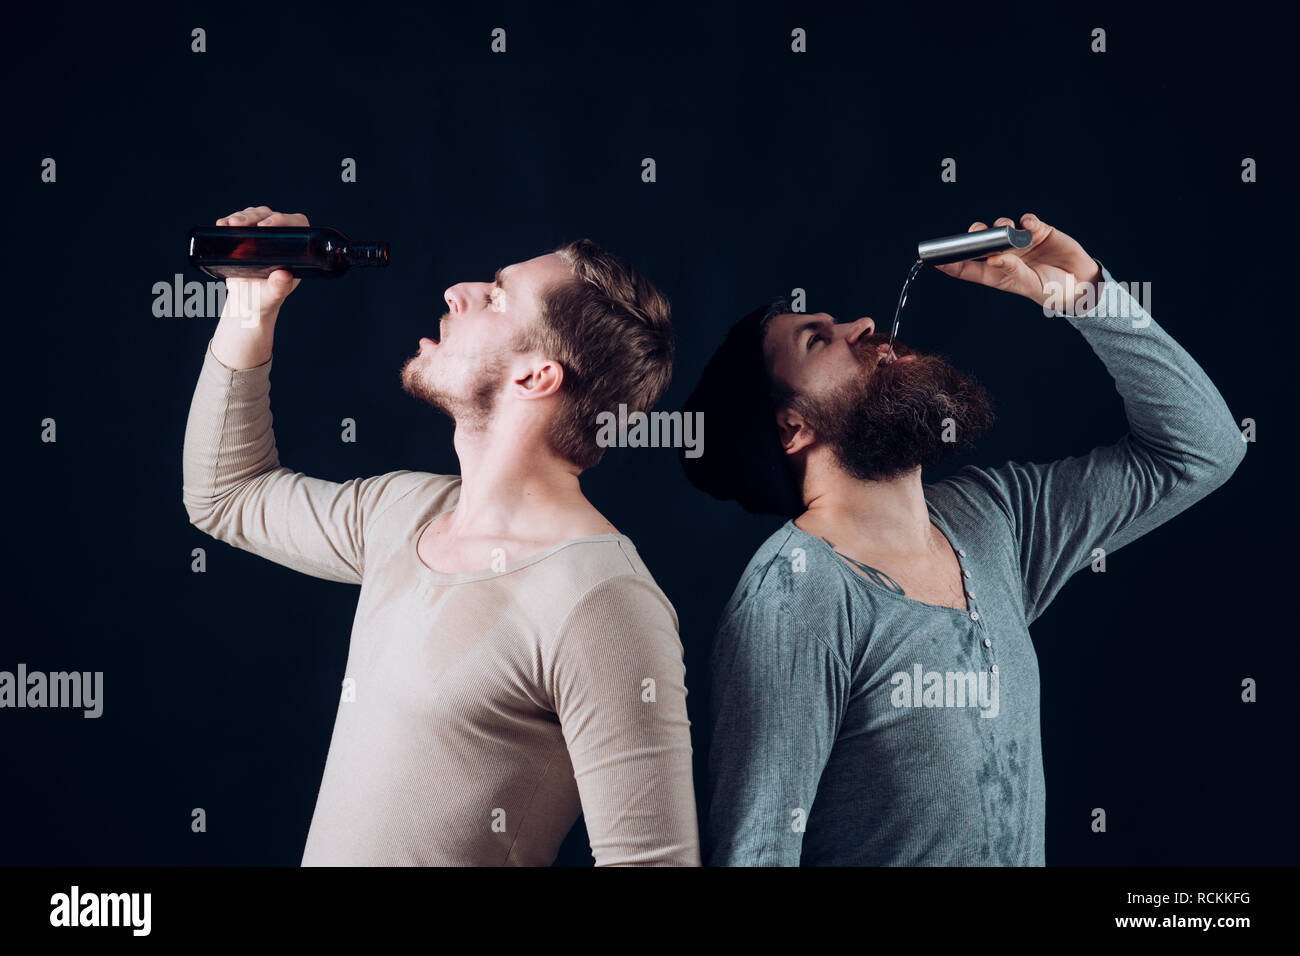 Drunkenness. Alcohol addicts. Men drinking alcohol from bottle and ...